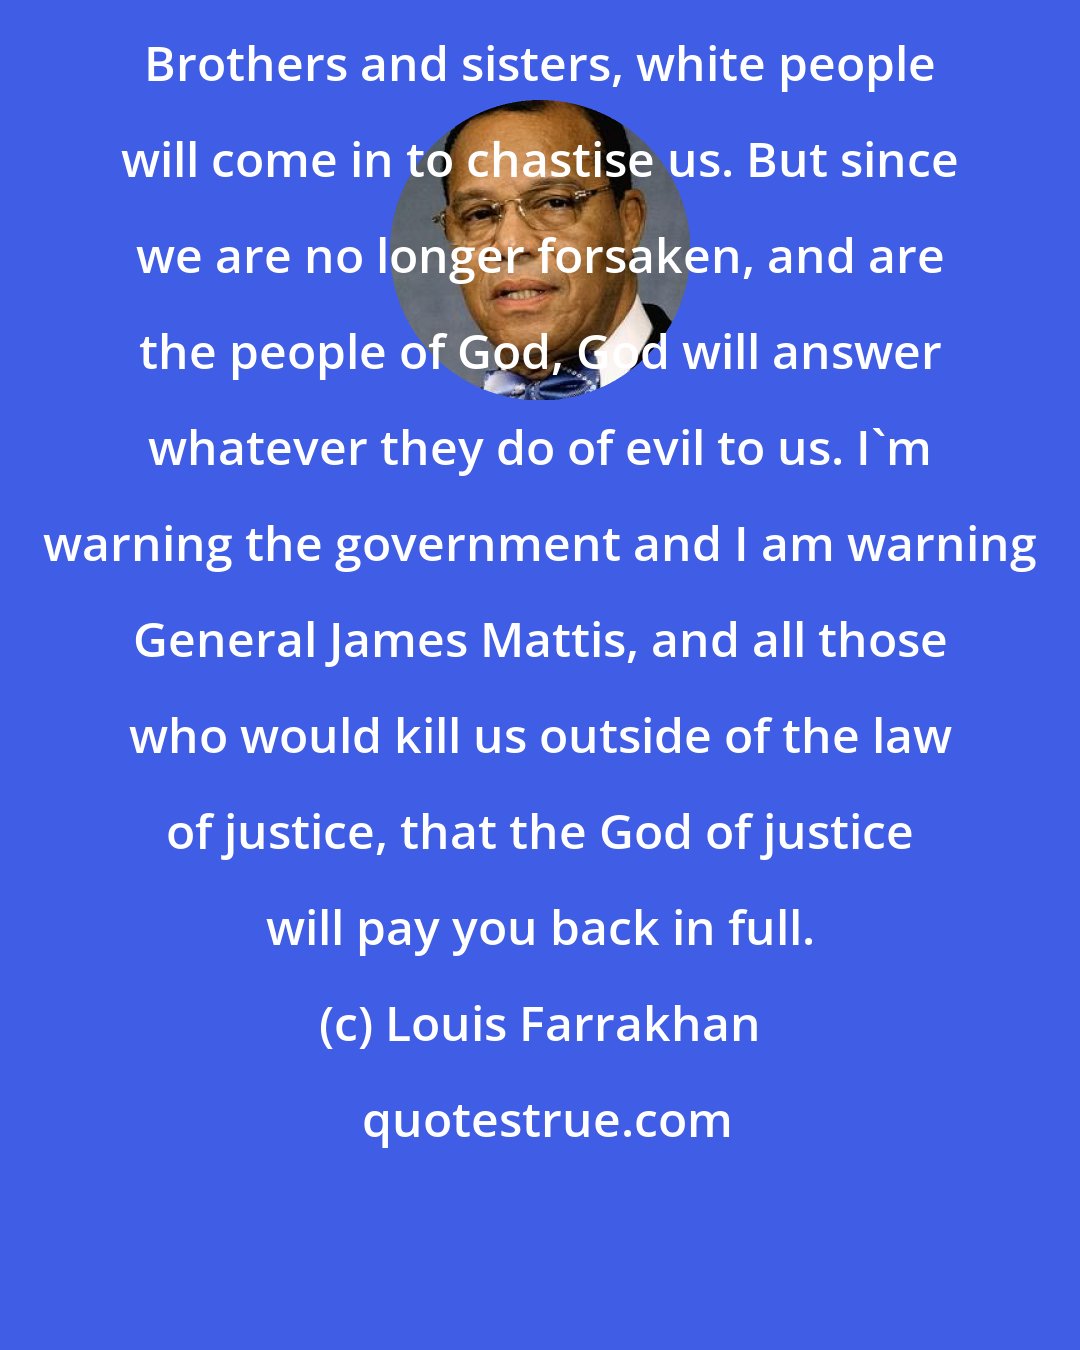 Louis Farrakhan: Brothers and sisters, white people will come in to chastise us. But since we are no longer forsaken, and are the people of God, God will answer whatever they do of evil to us. I'm warning the government and I am warning General James Mattis, and all those who would kill us outside of the law of justice, that the God of justice will pay you back in full.